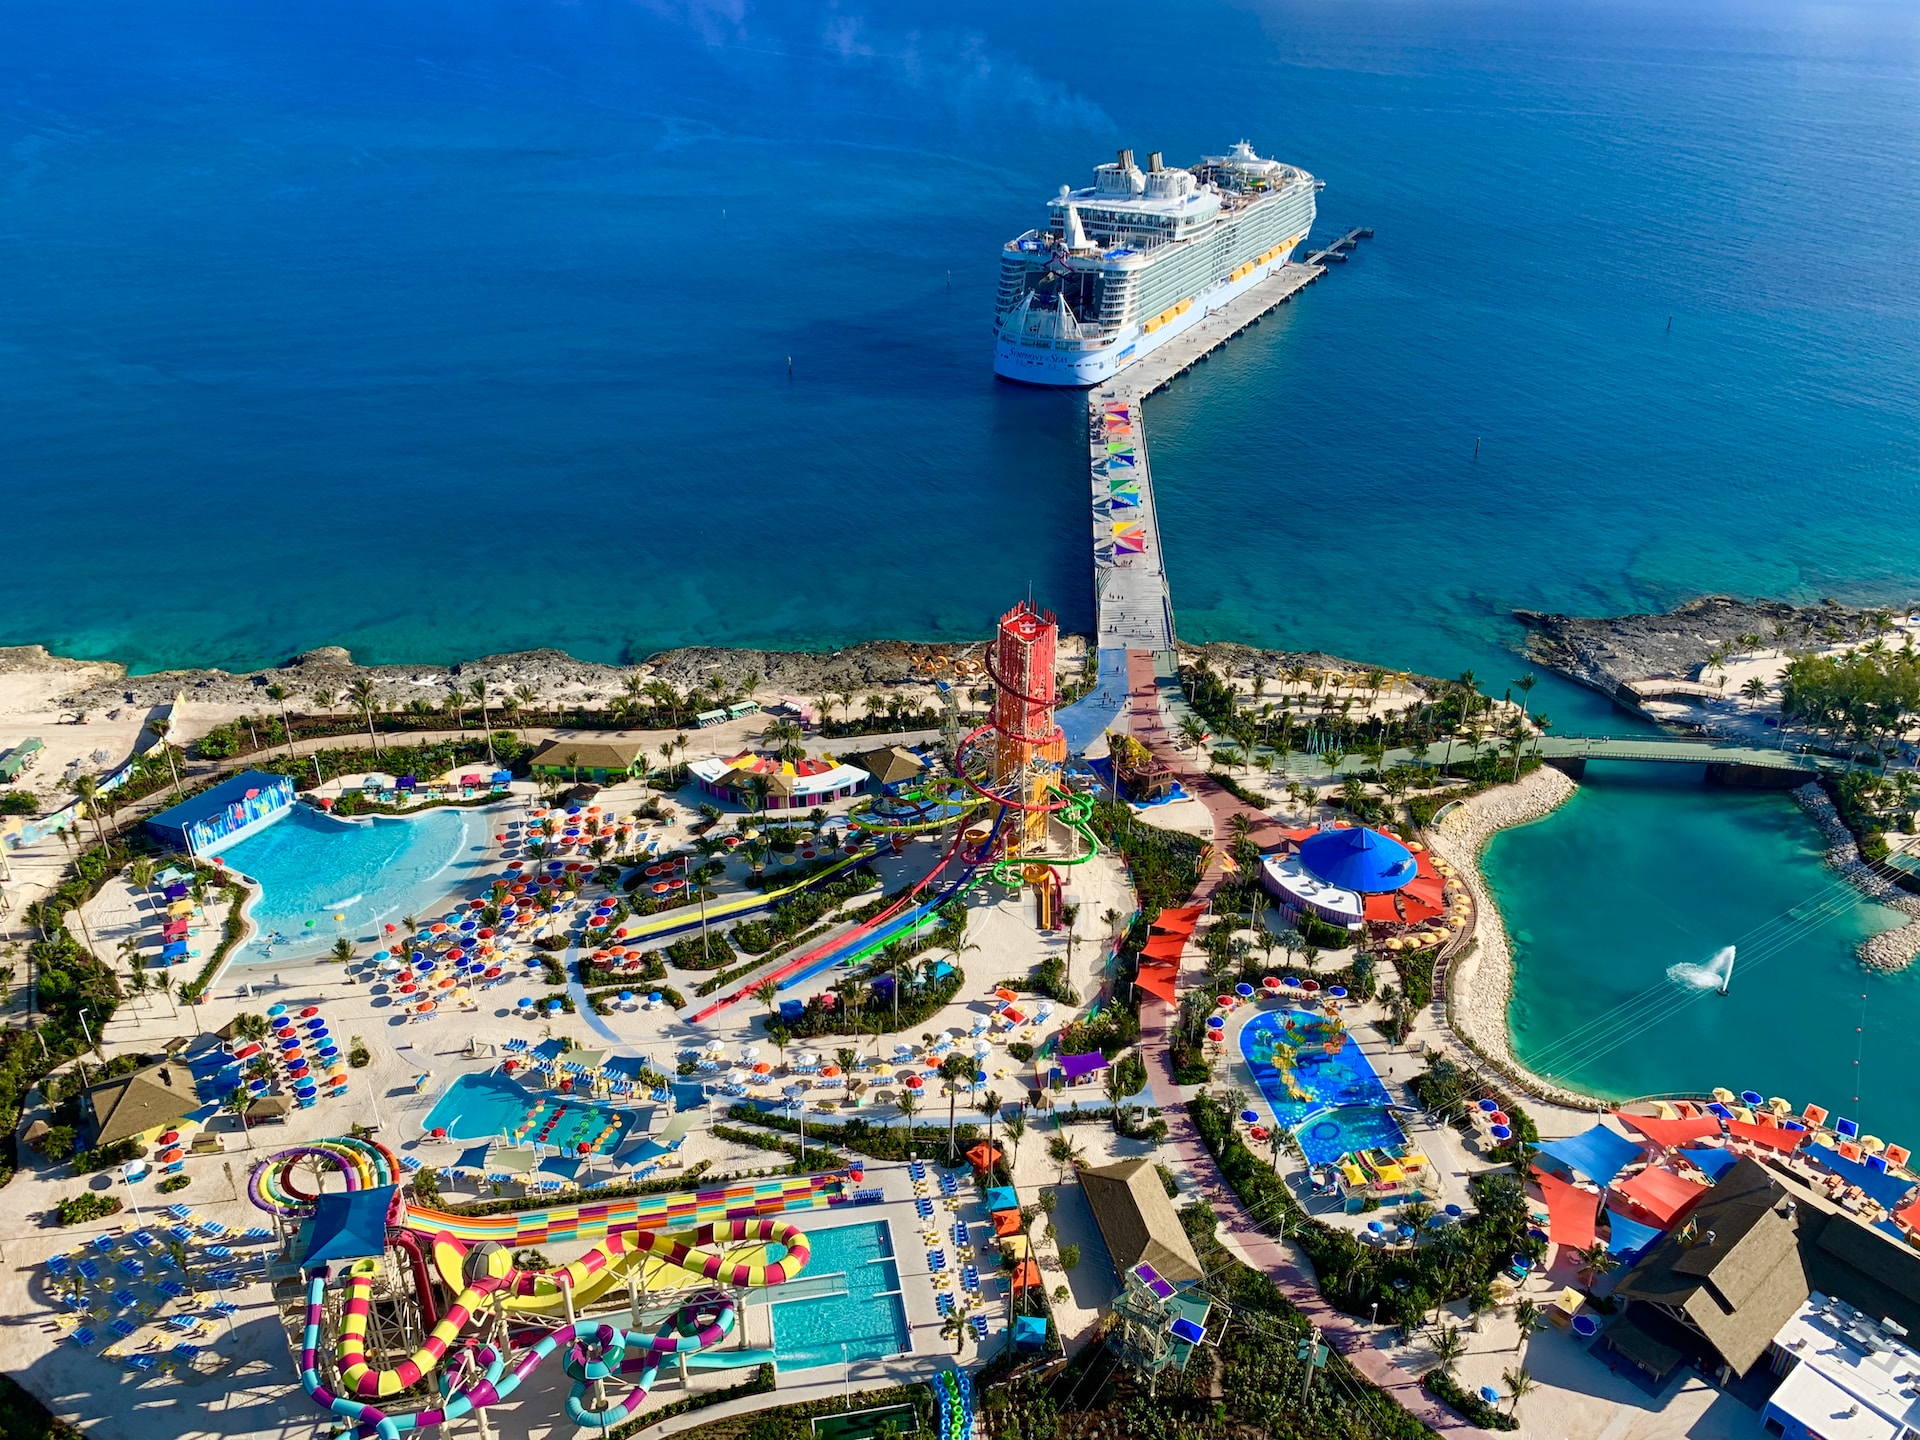 Weekend Getaways and the Perfect Day at CocoCay